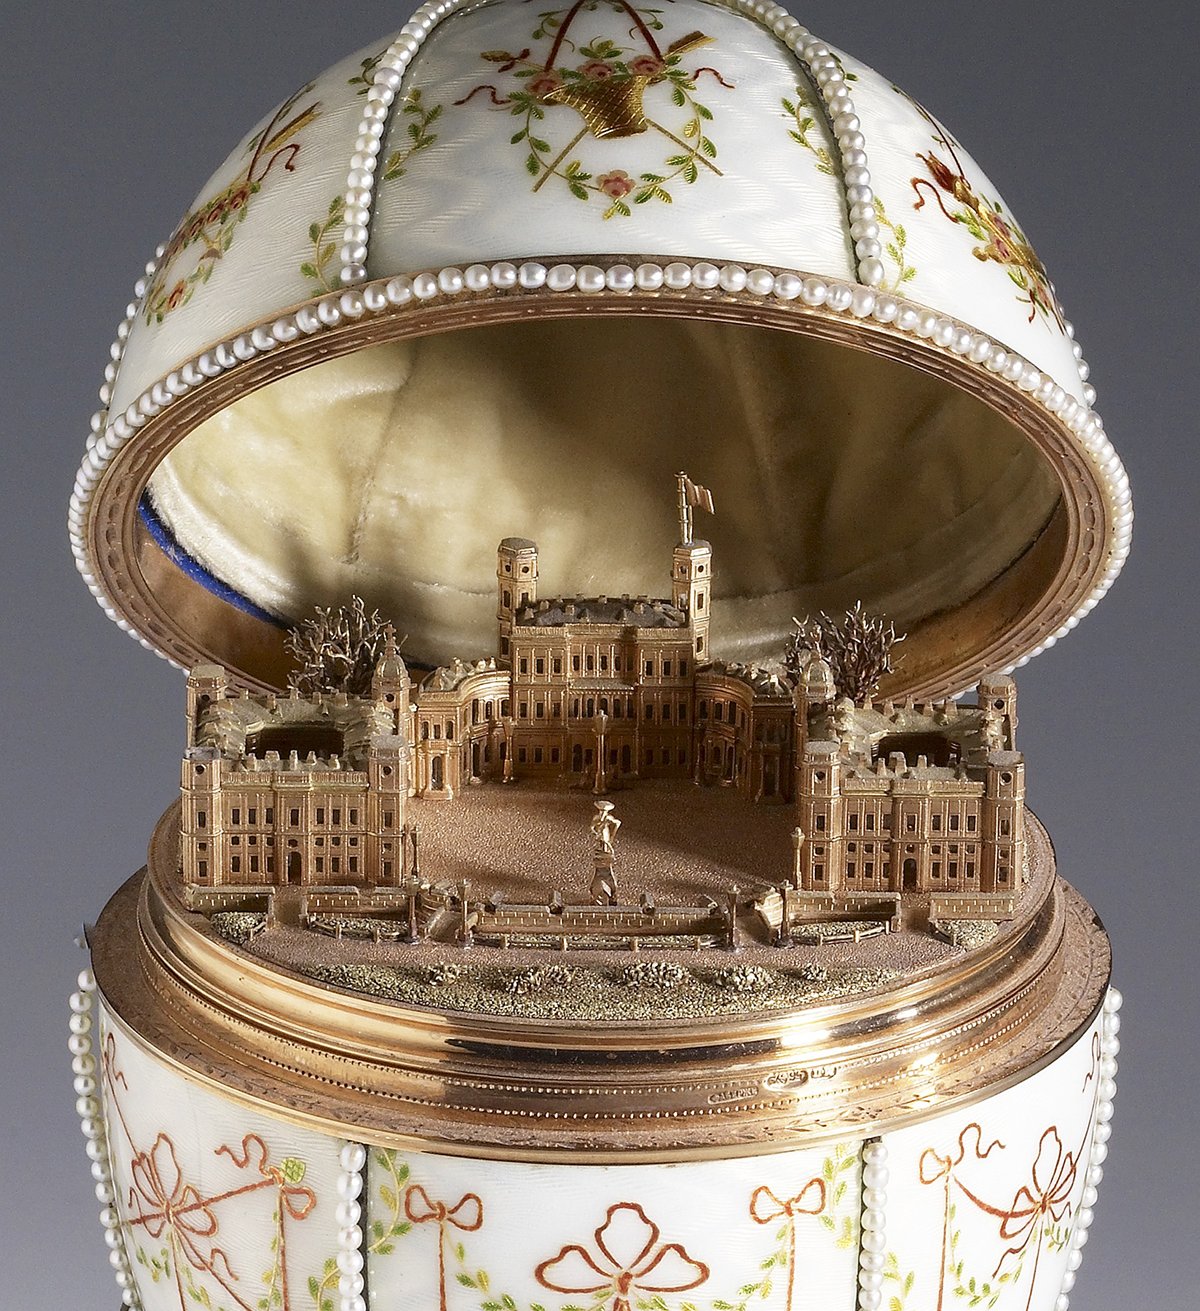 23 Most Expensive Faberge Eggs and Their Price